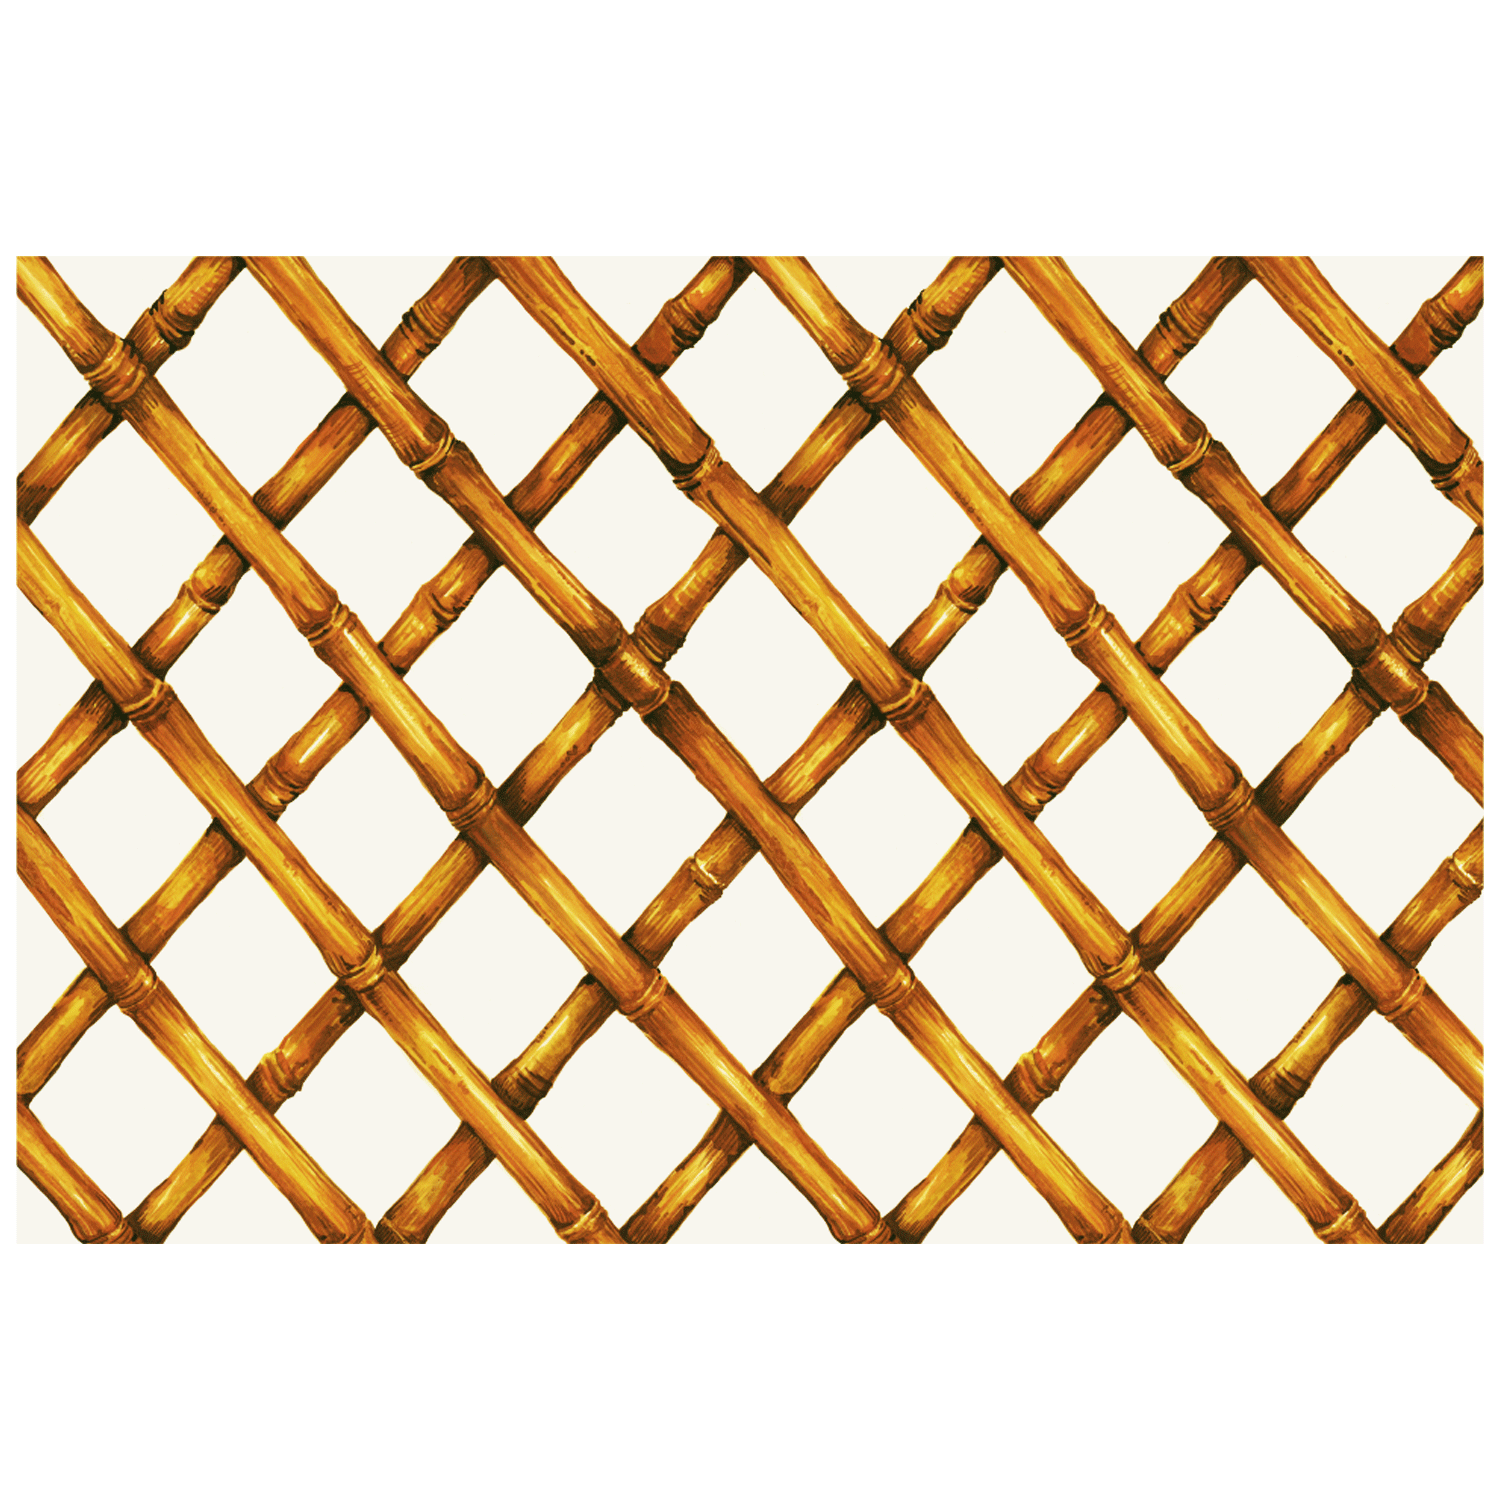 An image of a MISPRINT Bamboo Lattice Placemat by Hester &amp; Cook on a white background, perfect for creating a stylish tablescape with bamboo placemats.